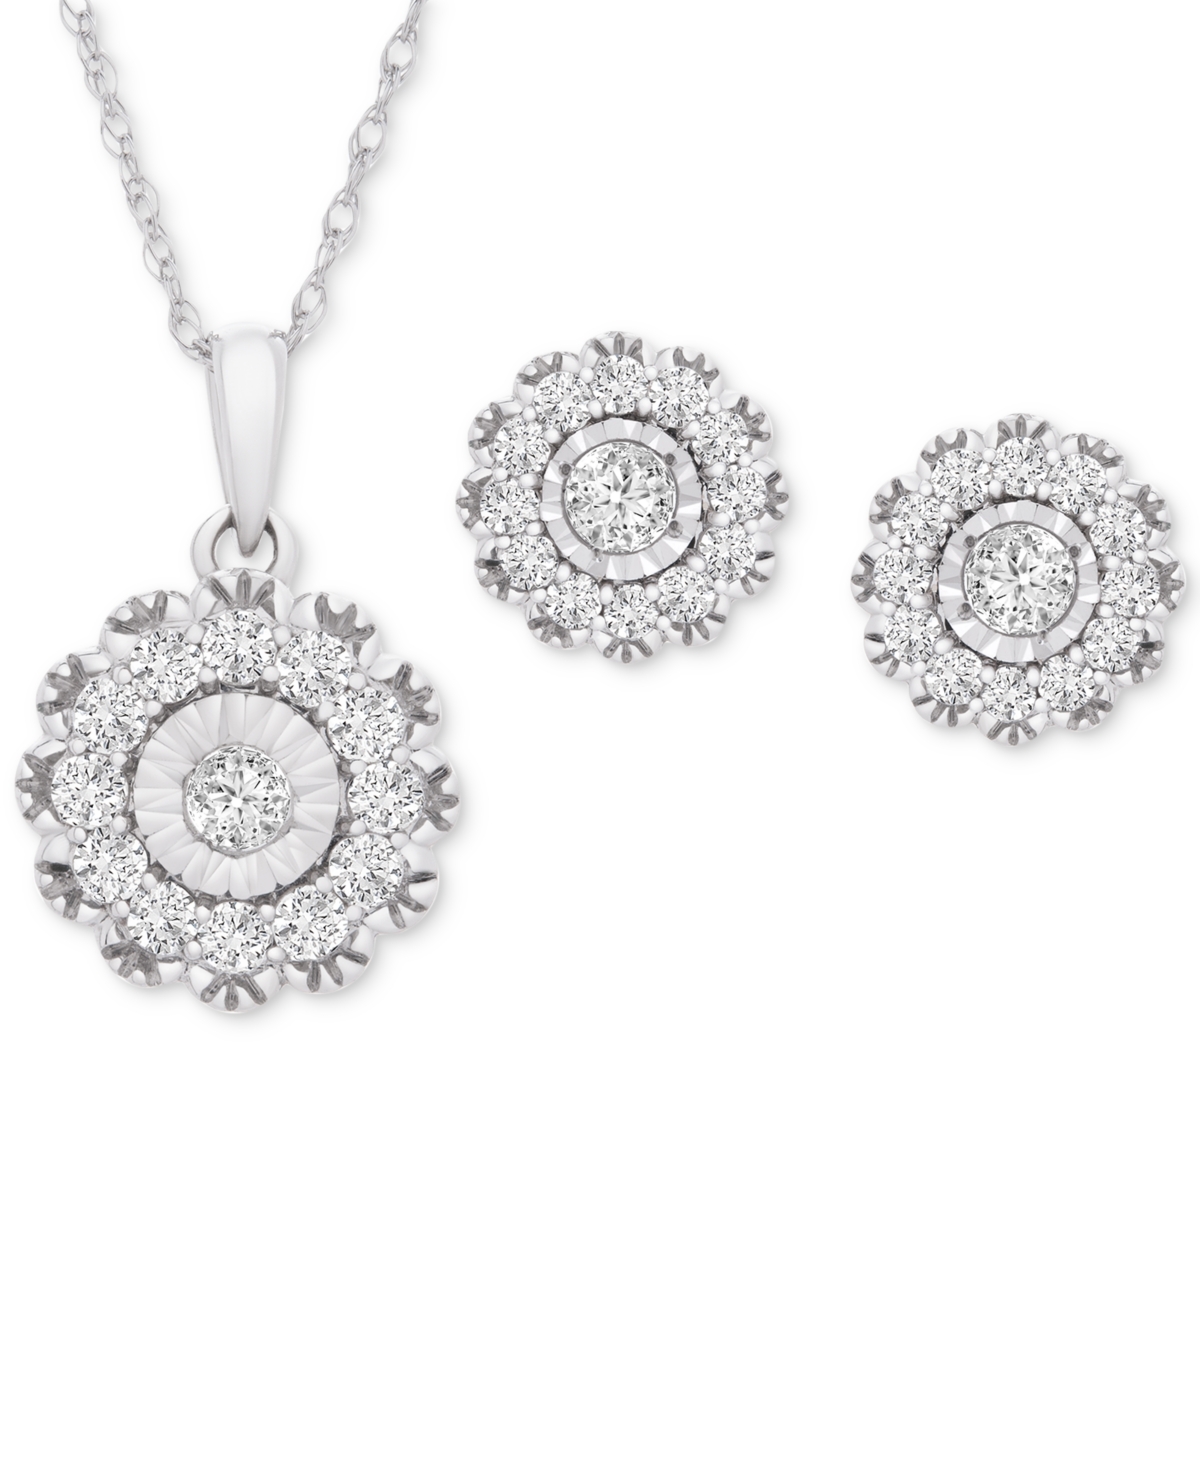 2-Pc. Set Diamond Pendant Necklace & Matching Stud Earrings (1 ct. t.w.) in 14k White Gold or 14k Yellow Gold, Created for Macy's - Ye